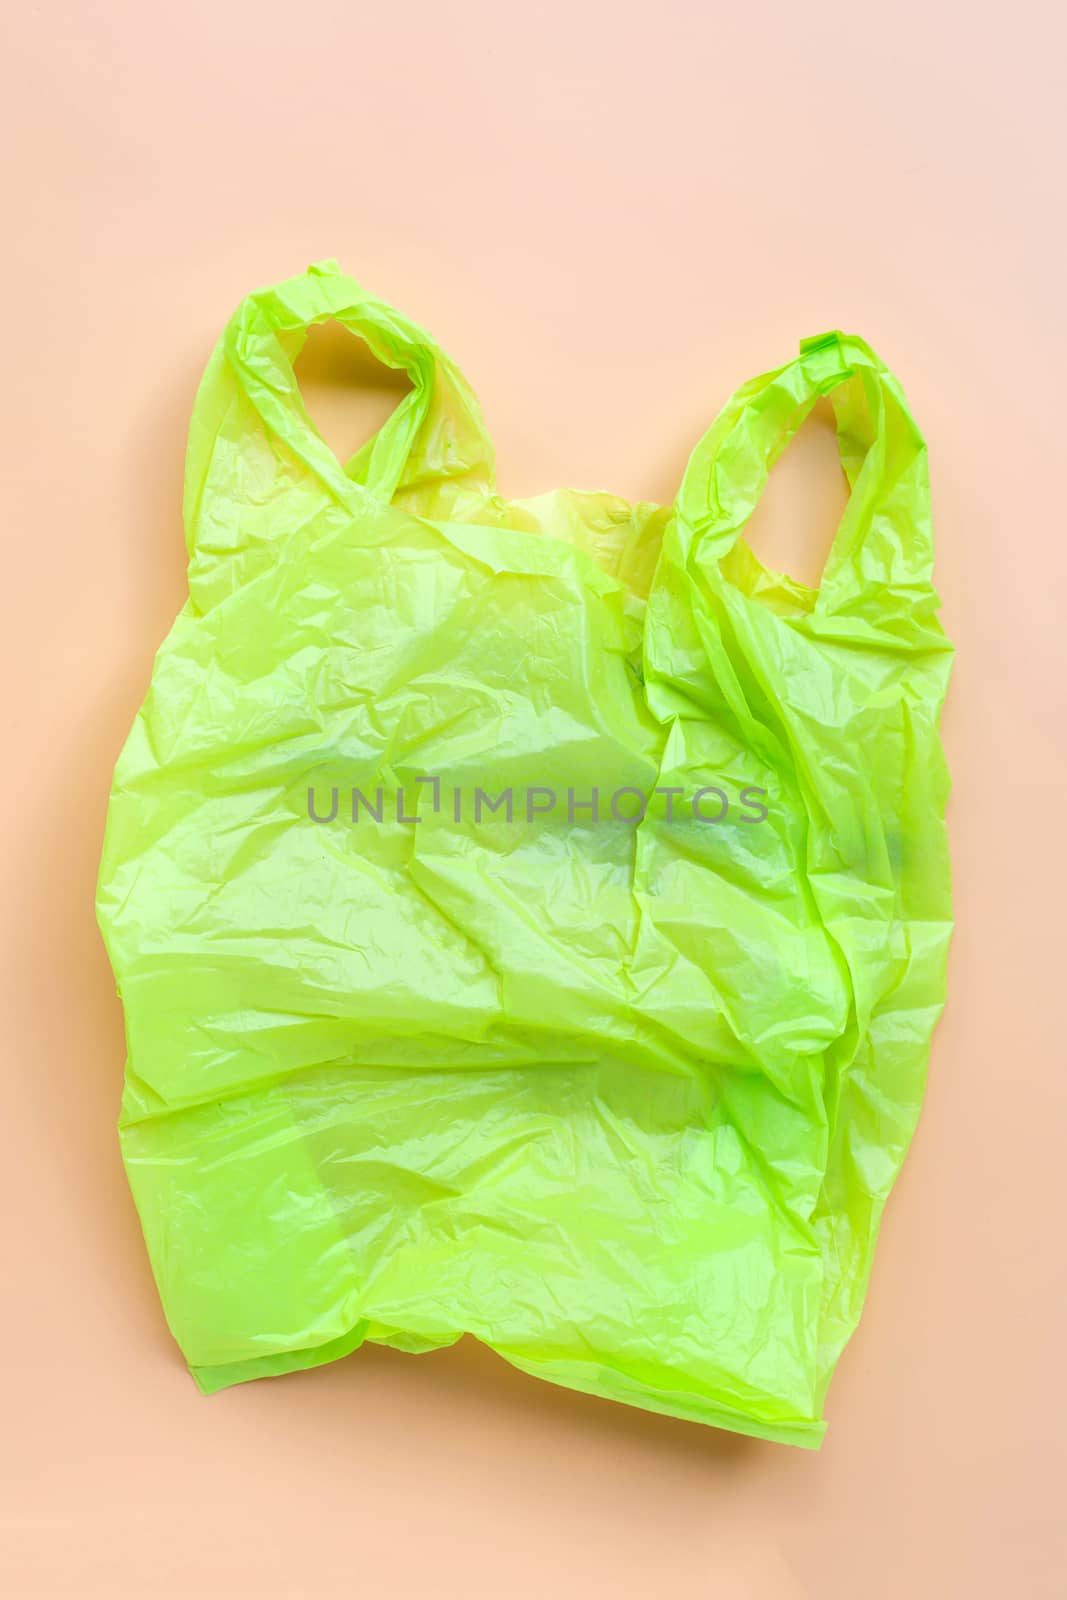 Green plastic bag on yellow background. Environment pollution co by Bowonpat